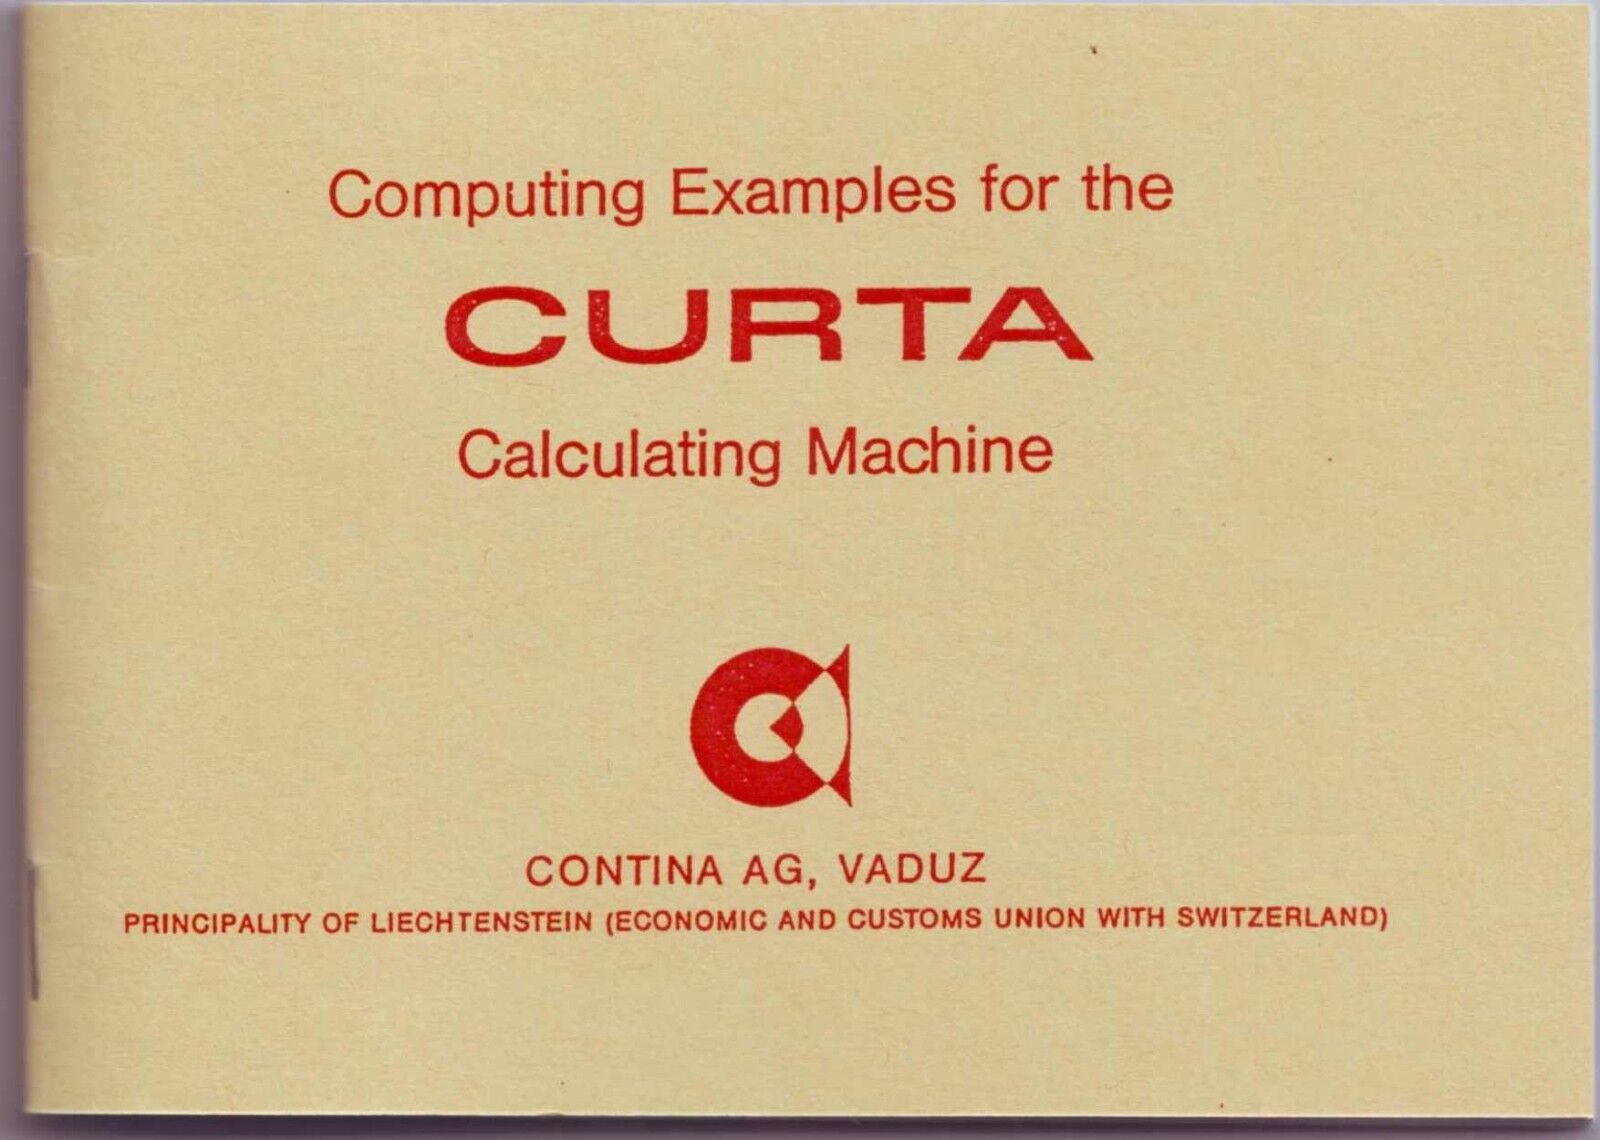 CURTA-Computing examples for the Curta Calculator (booklet in english language)